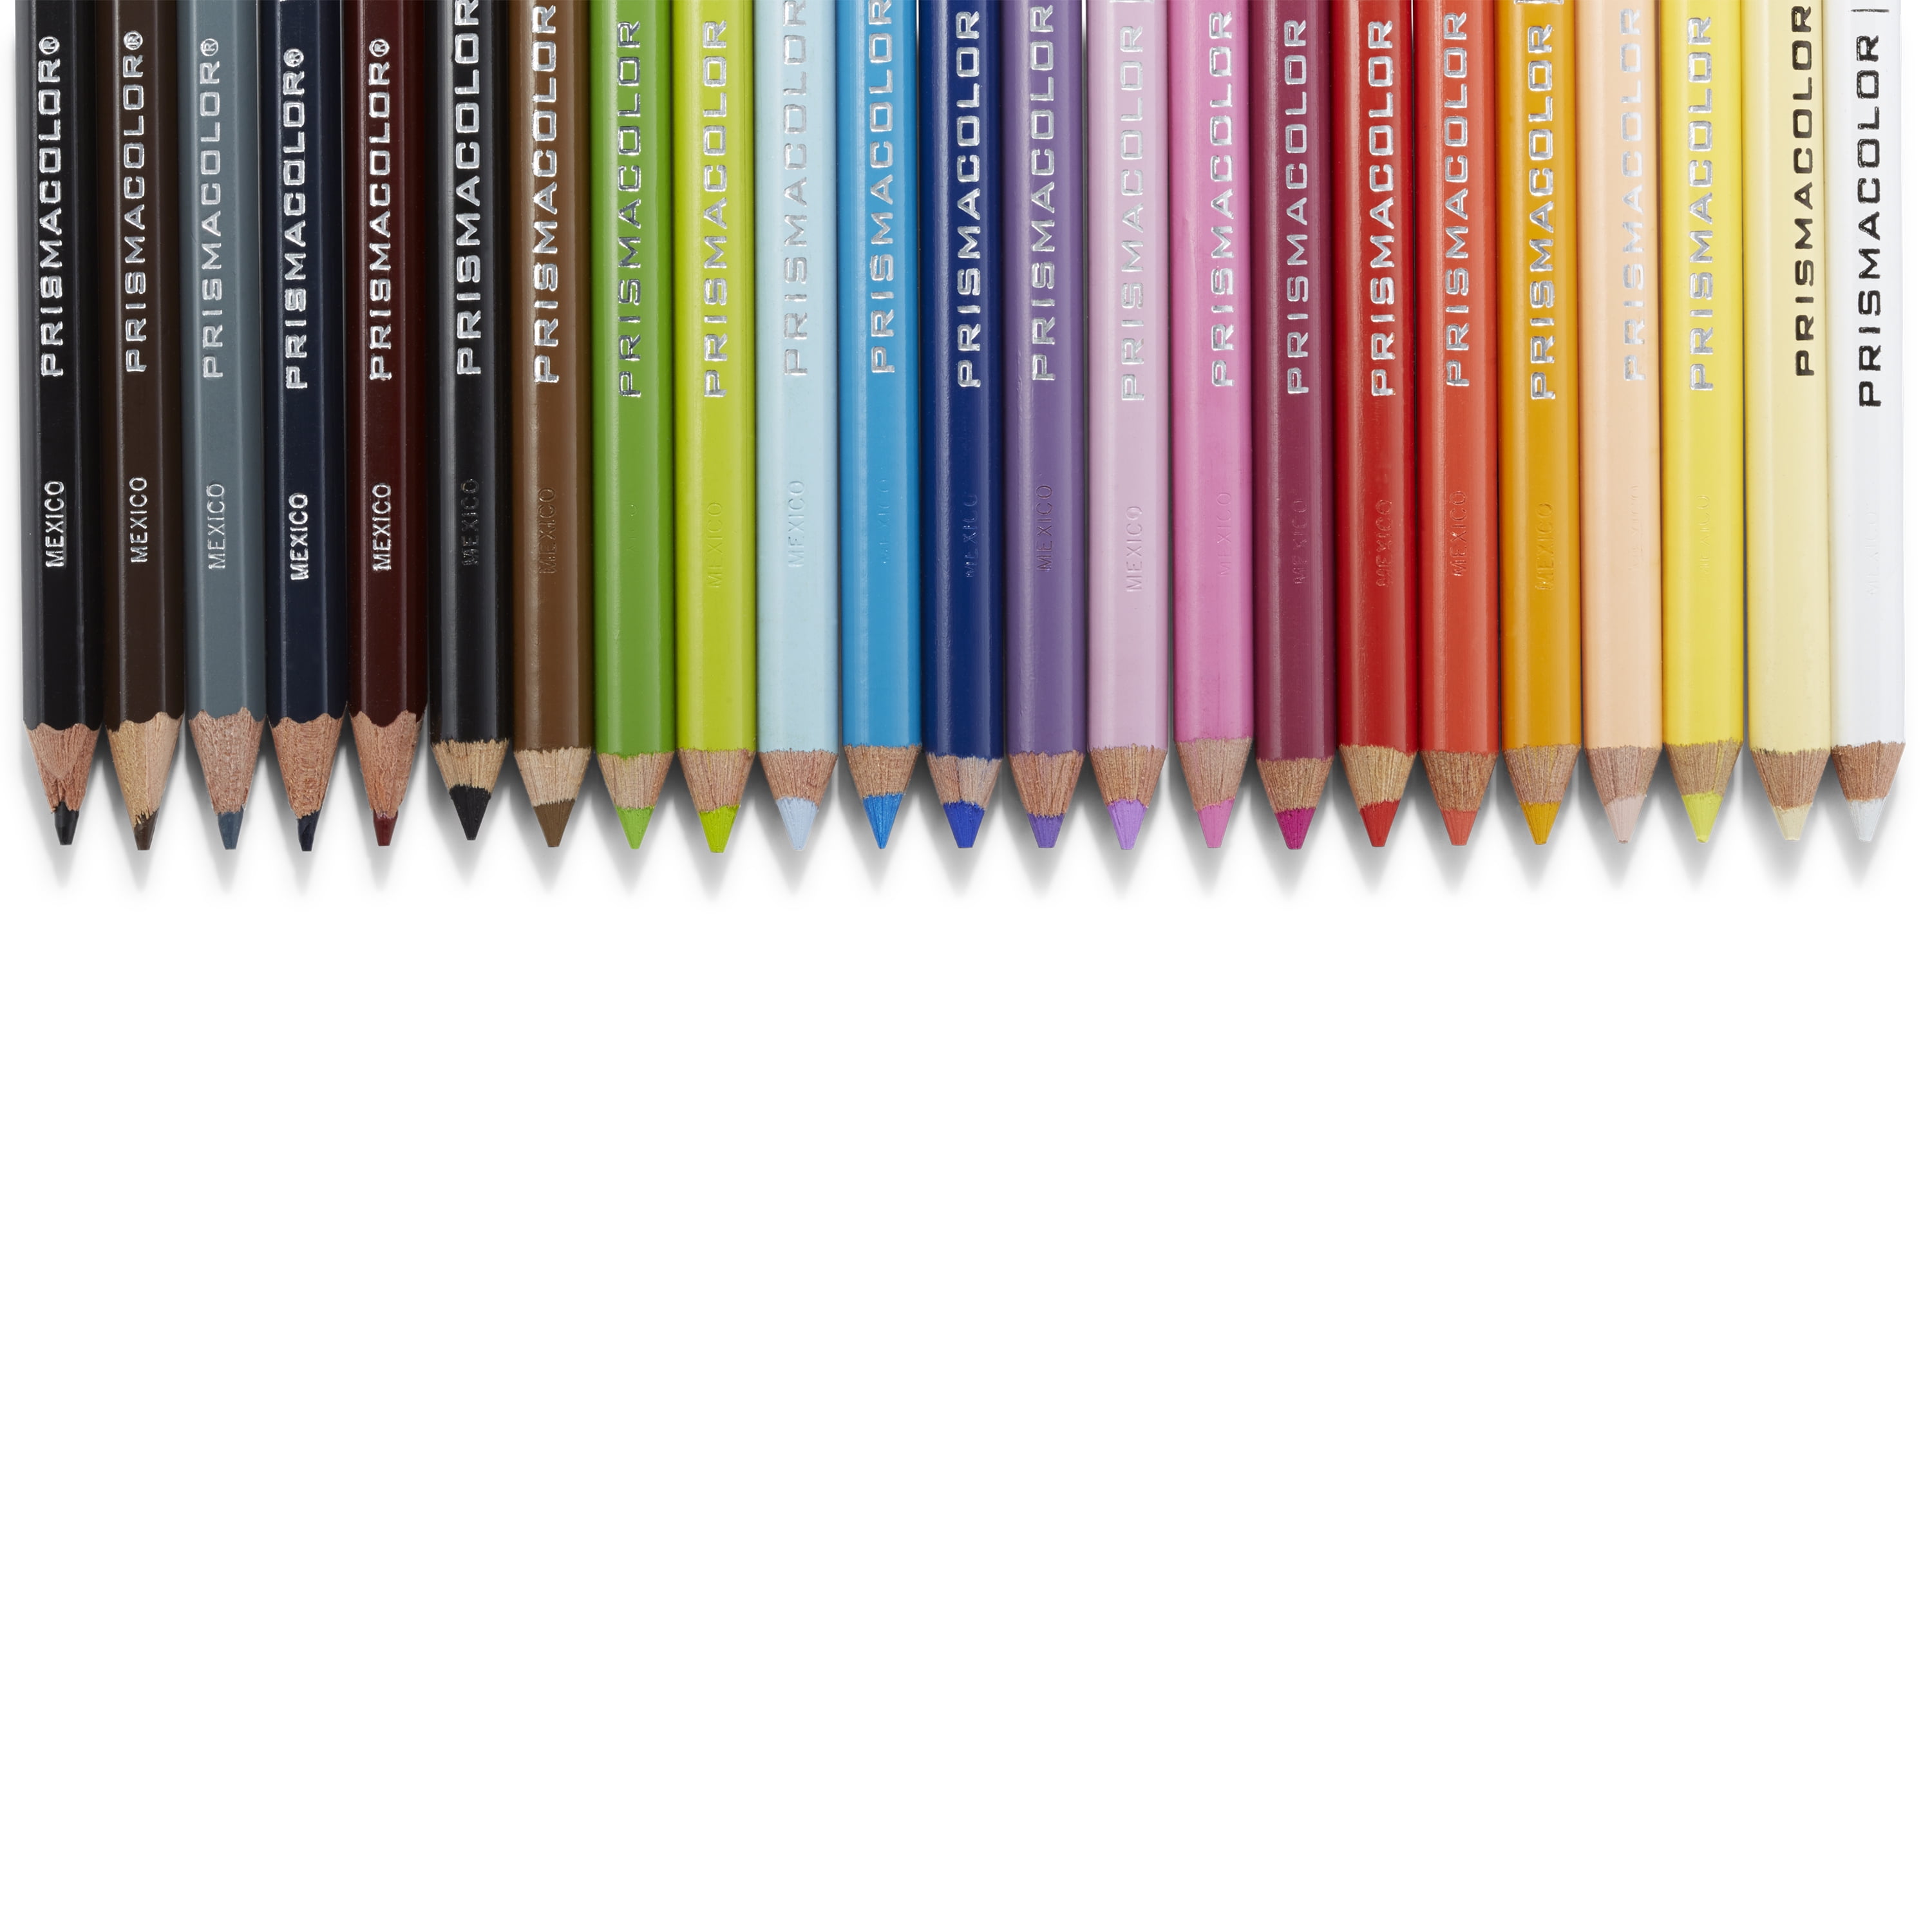 Expensive Prismacolors: do you get what you pay for? A comic